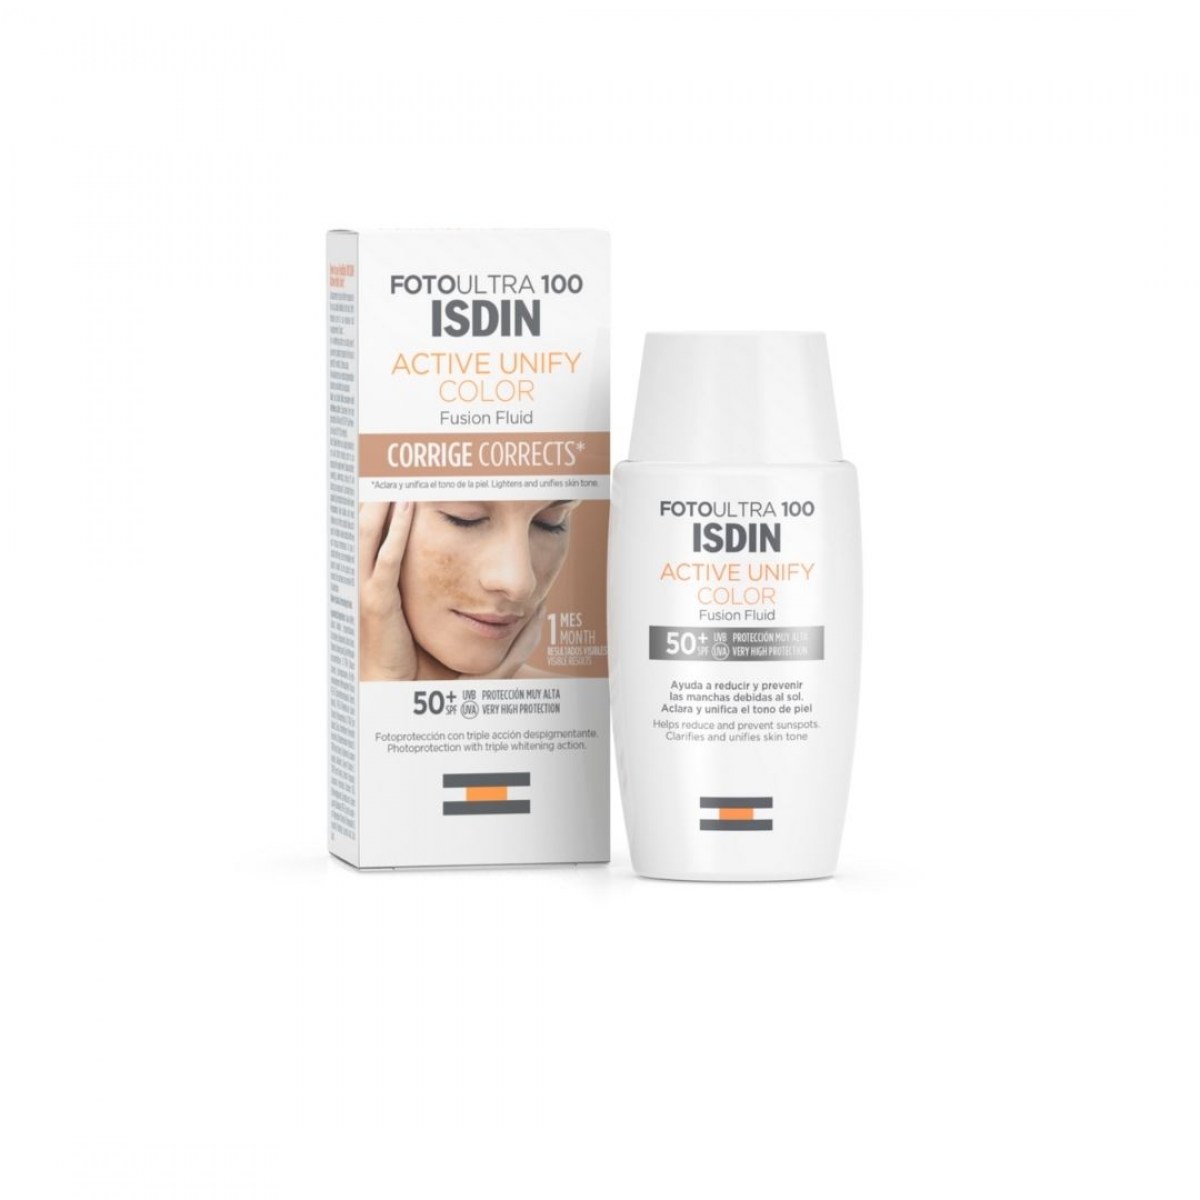 FOTO ULTRA 100 ISDIN ACTIVE UNIFY COLOR FUSION FLUID SPF 50+, 50 ML